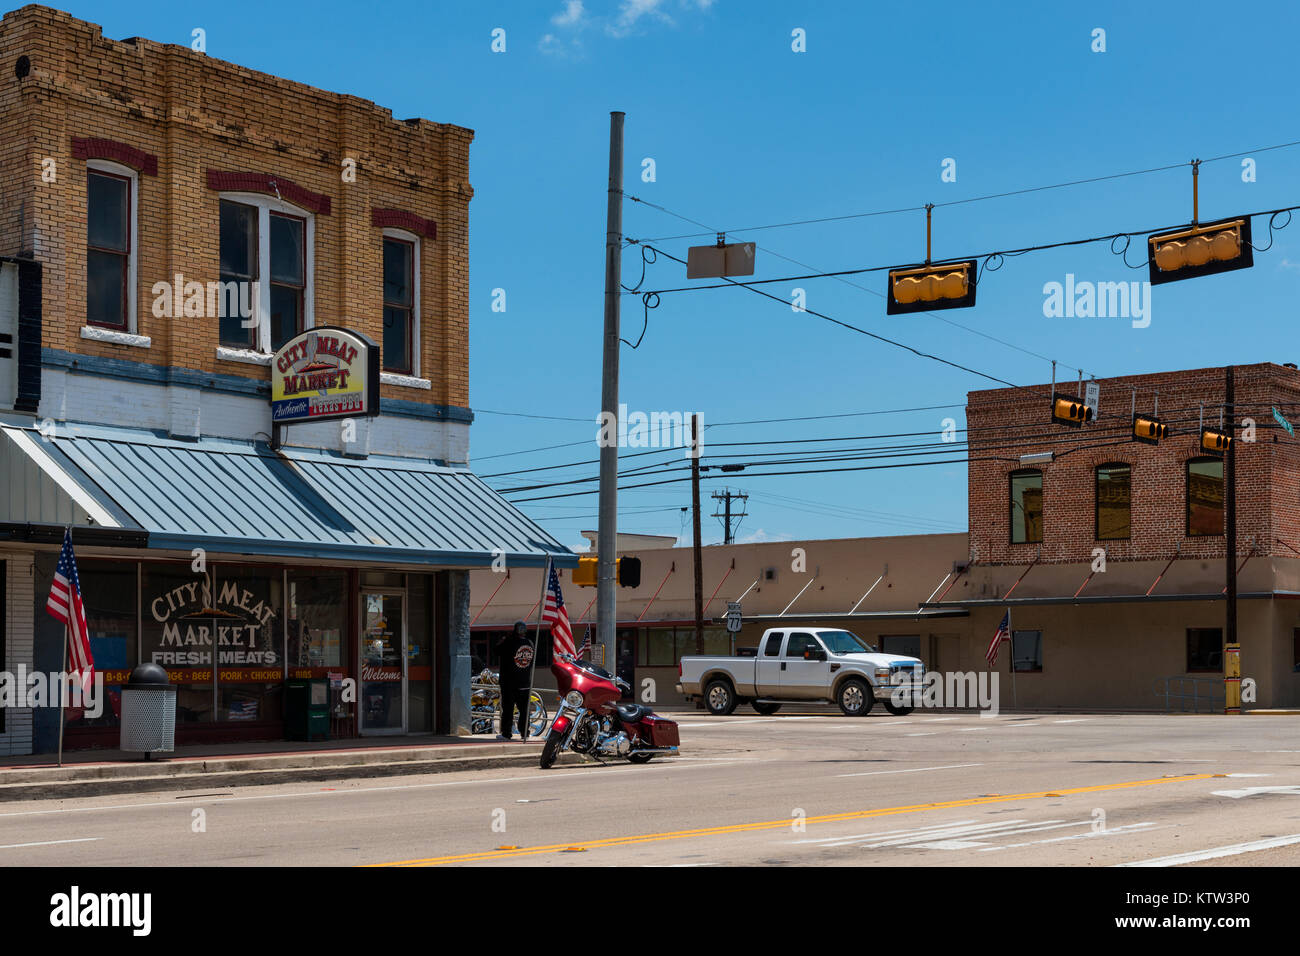 Giddings, Texas - June 13, 2014: Stret scene in the city of Giddings in the intersection of U.S. Highways 77 and 290 in Texas, USA. Stock Photo